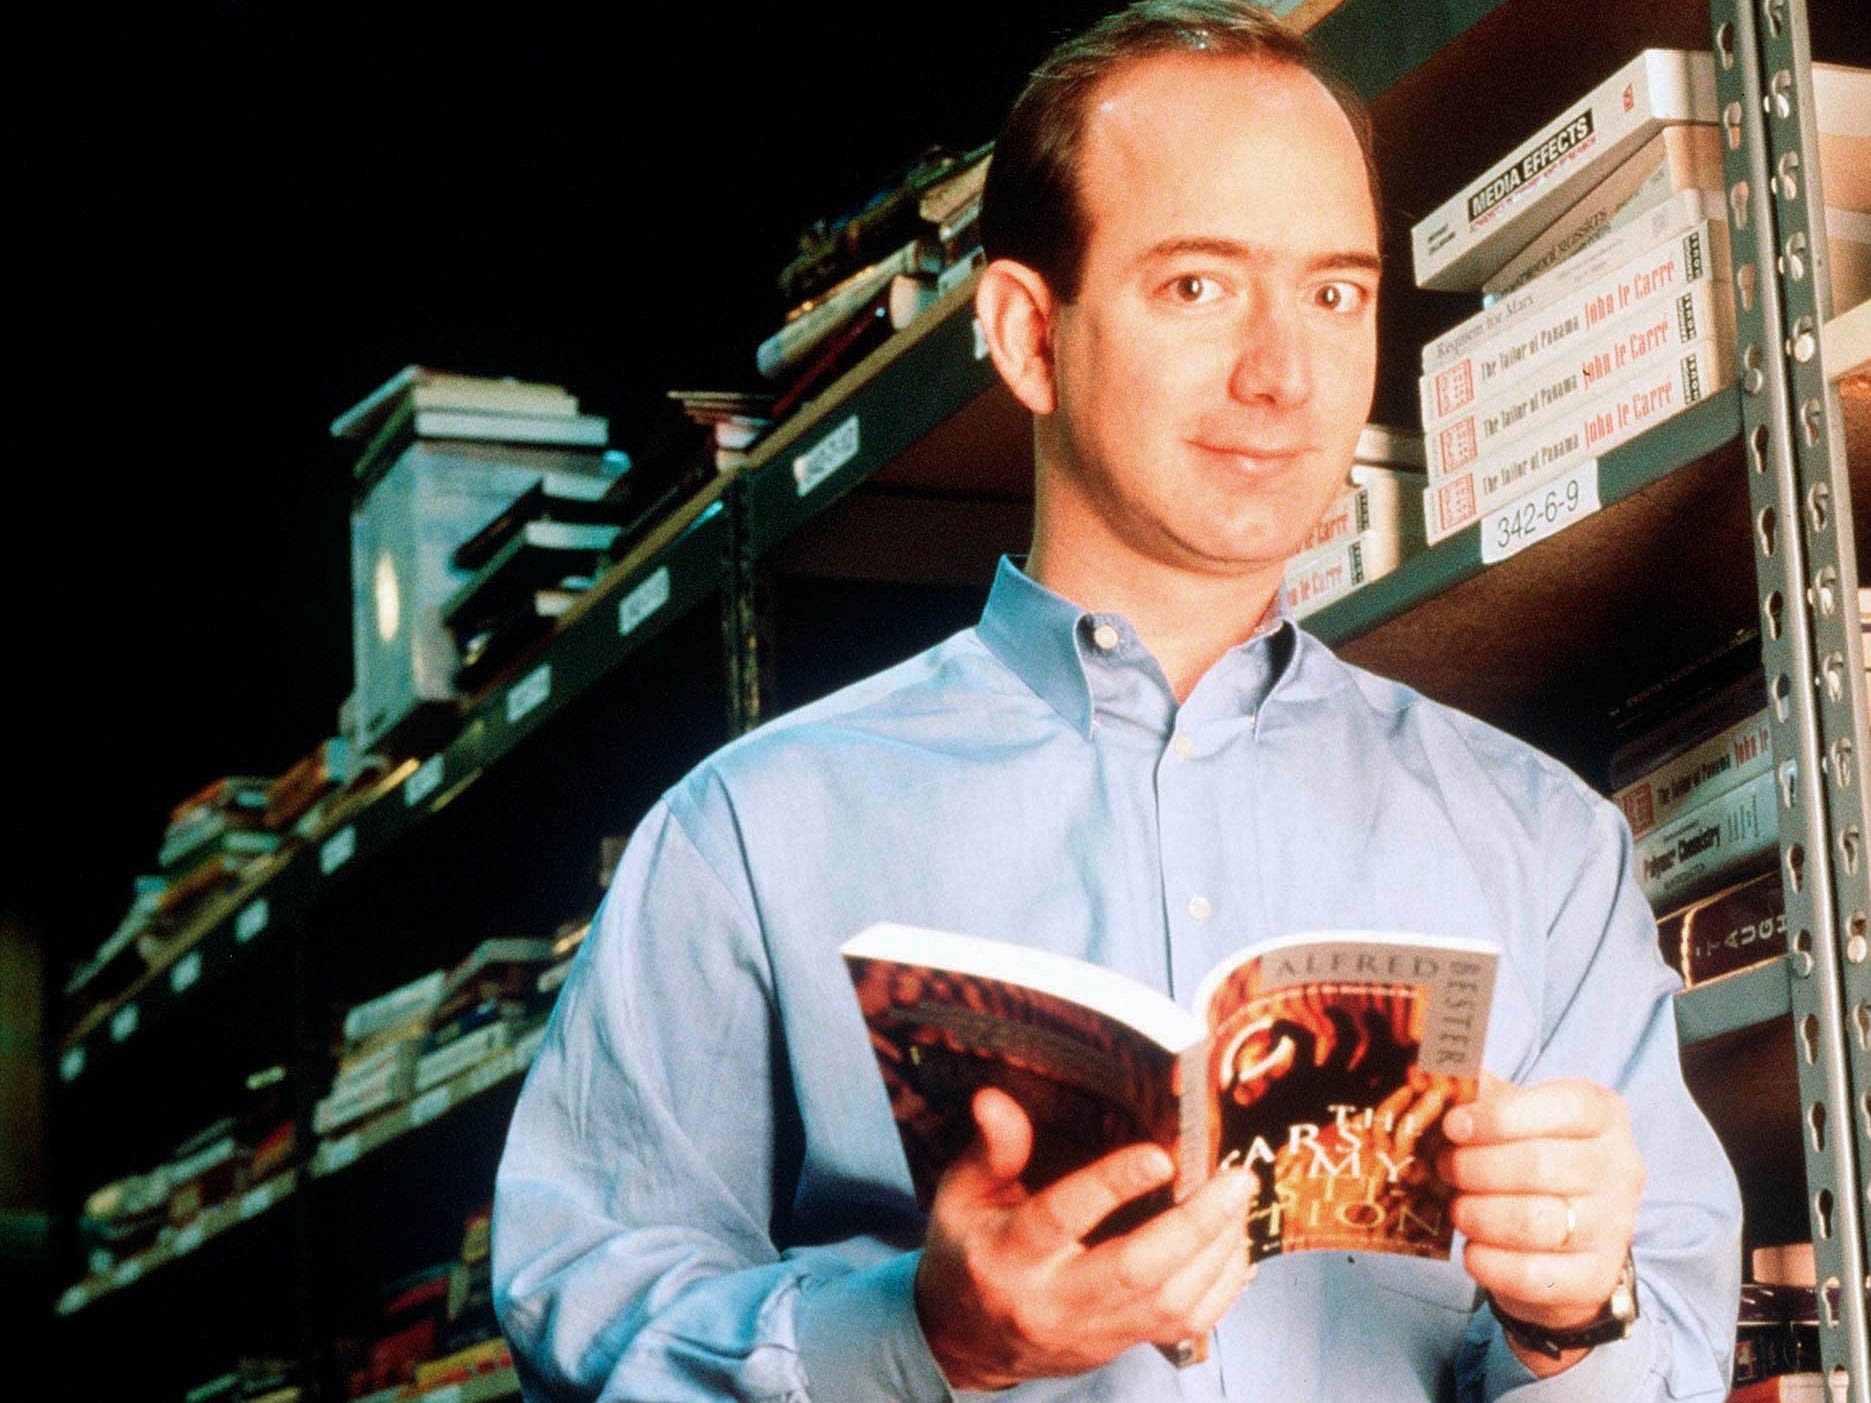 Photos show Jeff Bezos' style glow-up over 30 years, from bookish businessman to a Vogue photo shoot and the Met Gala